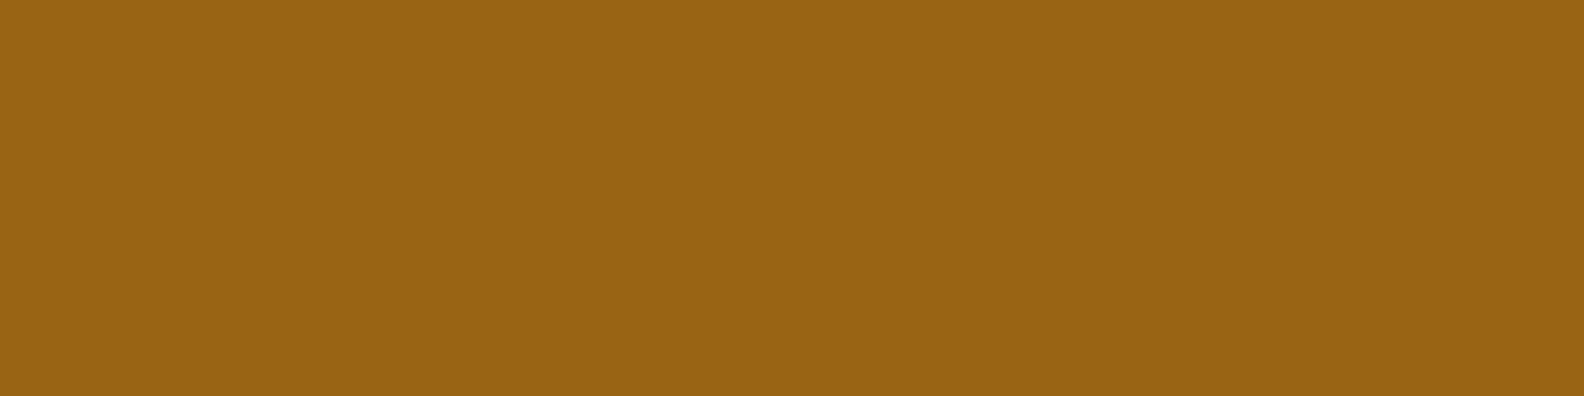 1584x396 Golden Brown Solid Color Background